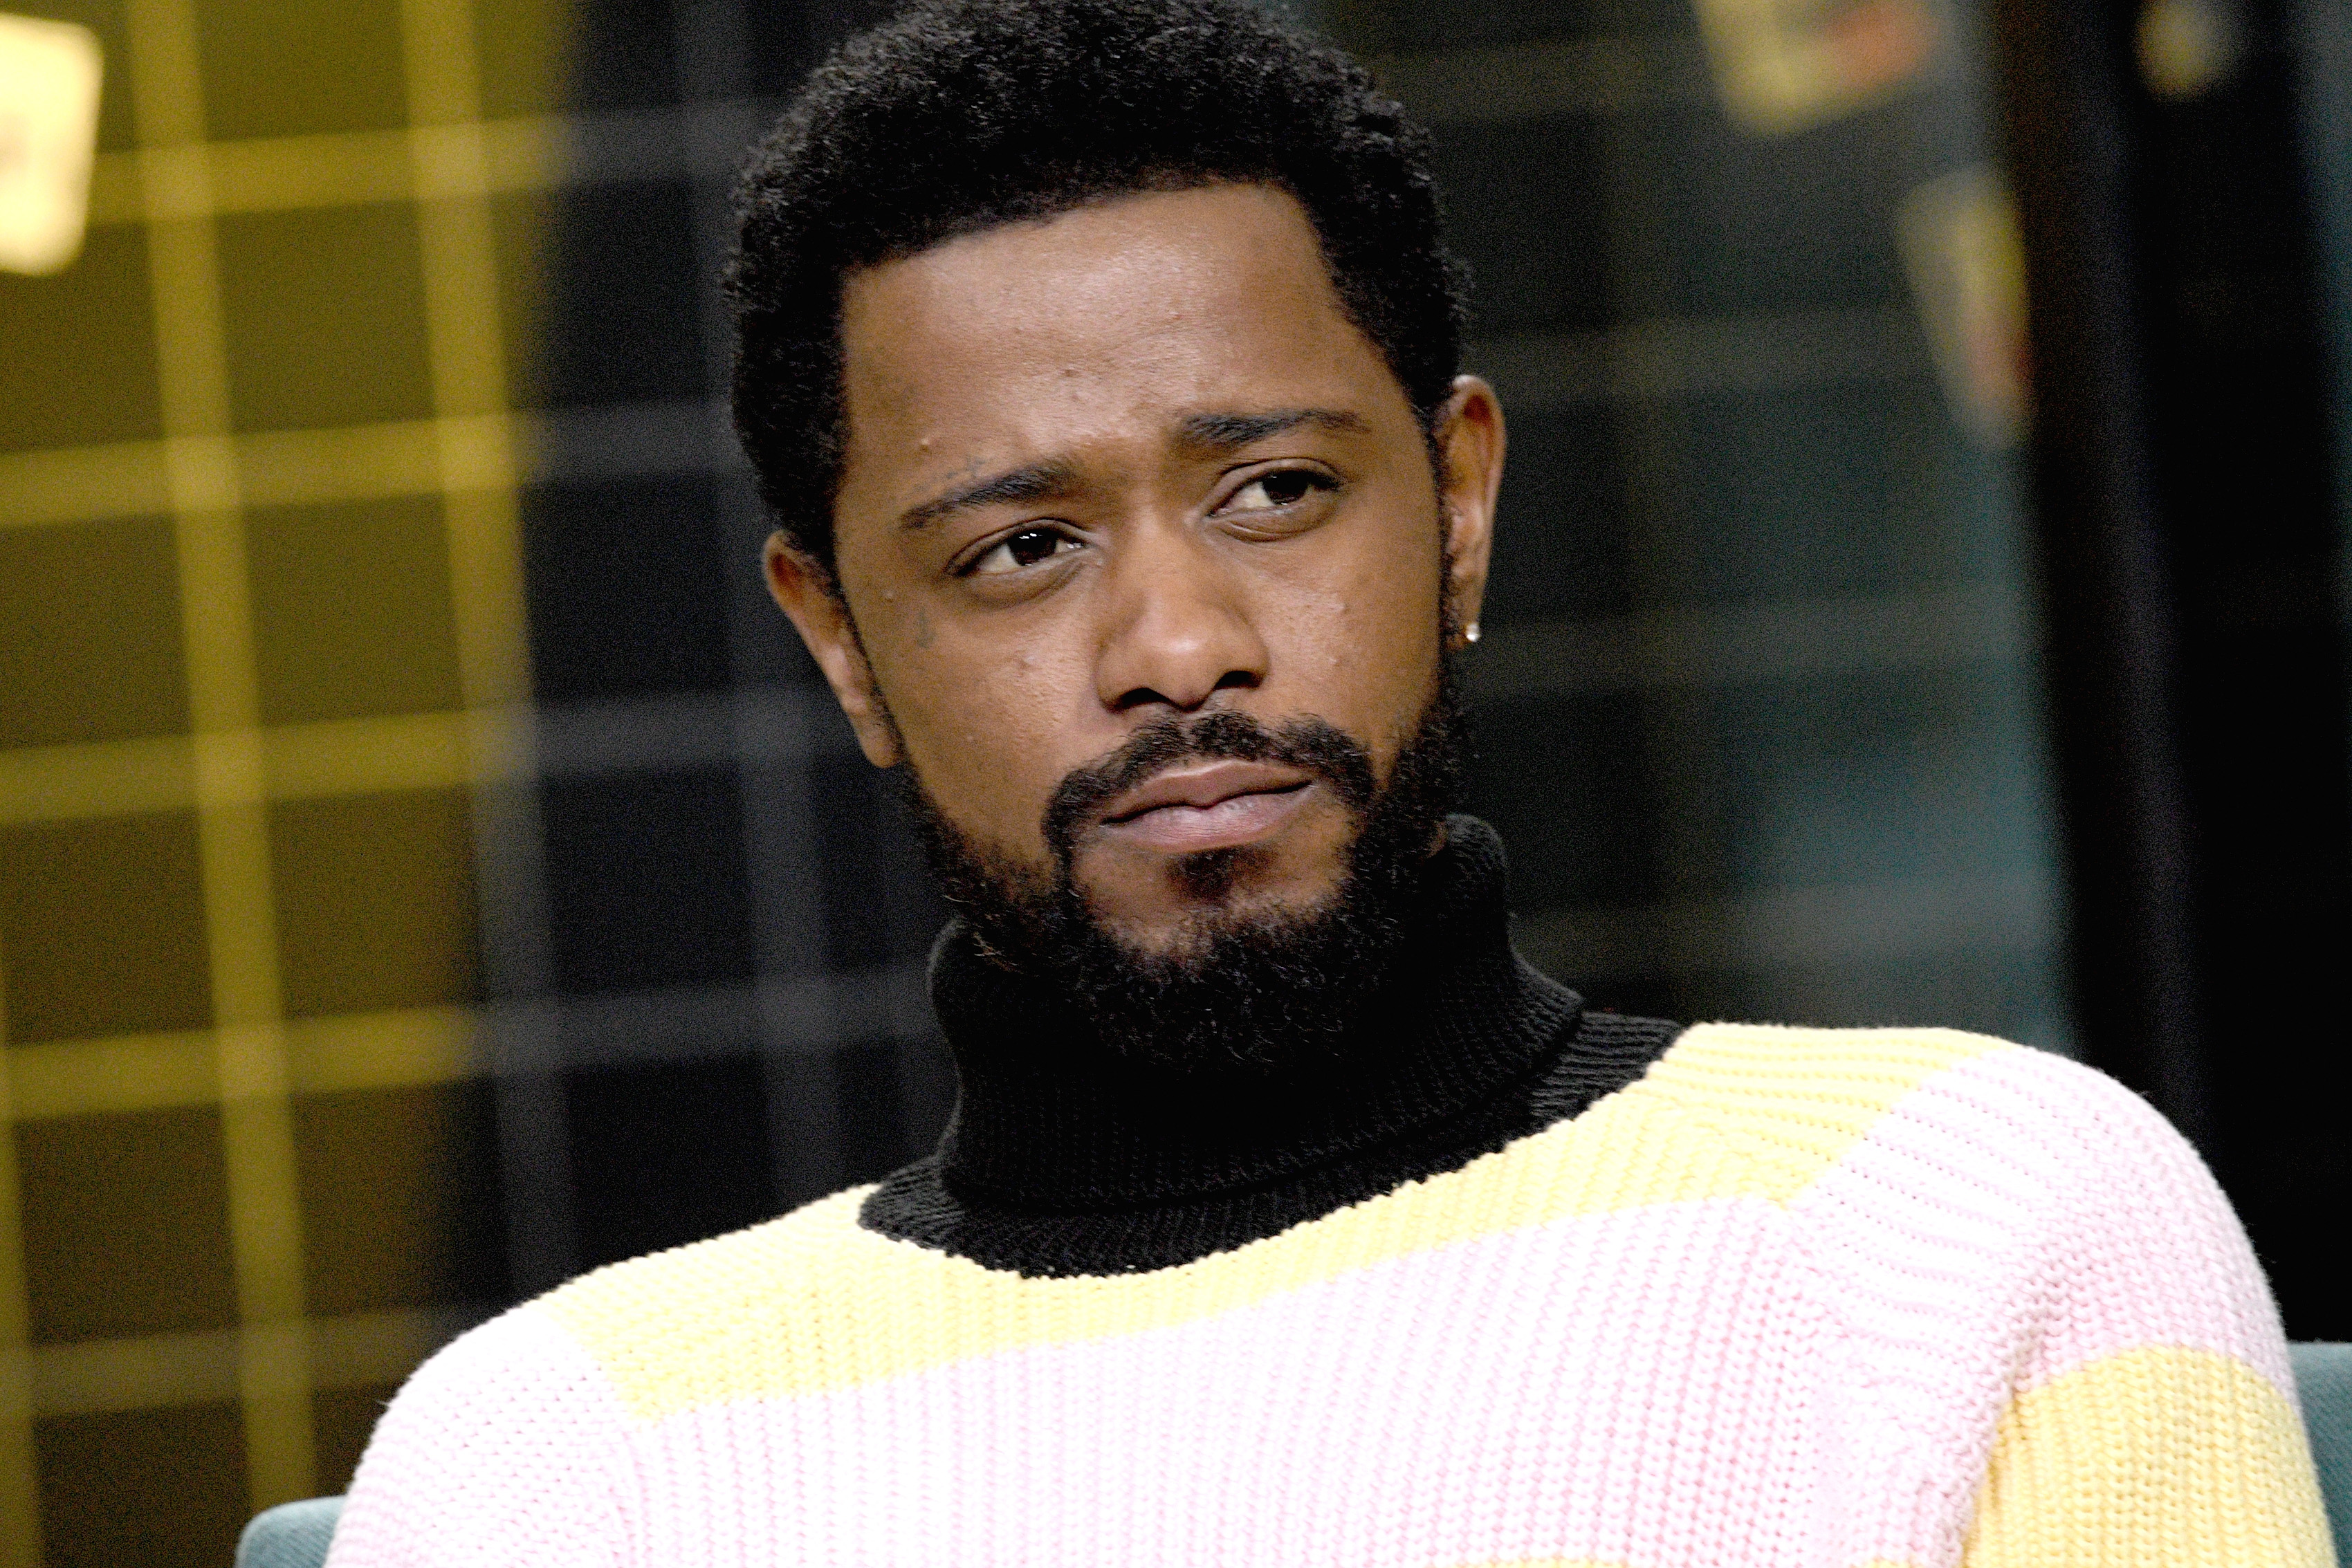 LaKeith Stanfield's Instagram posts have left fans seriously concerned...